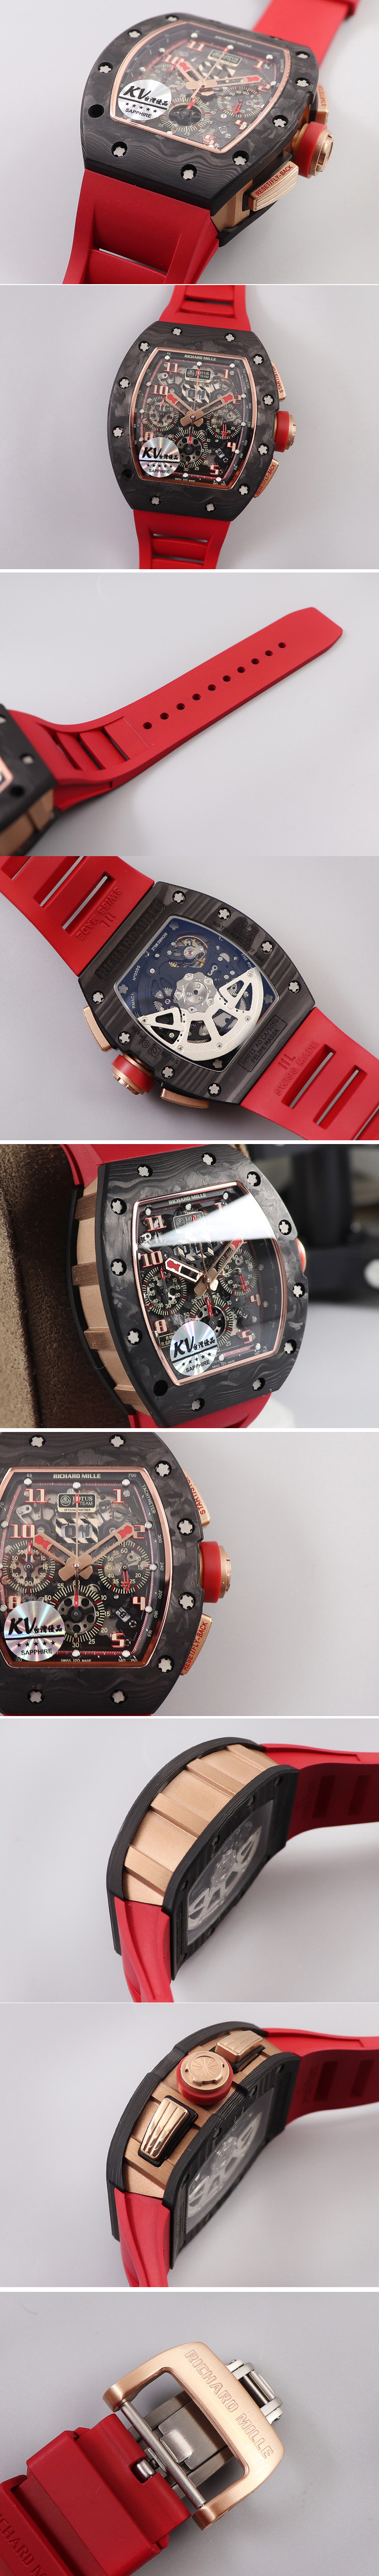 Replica Richard Mille RM011 NTPT Chrono RG Case KVF 1:1 Best Edition Crystal Dial Red on Red Rubber Strap A7750